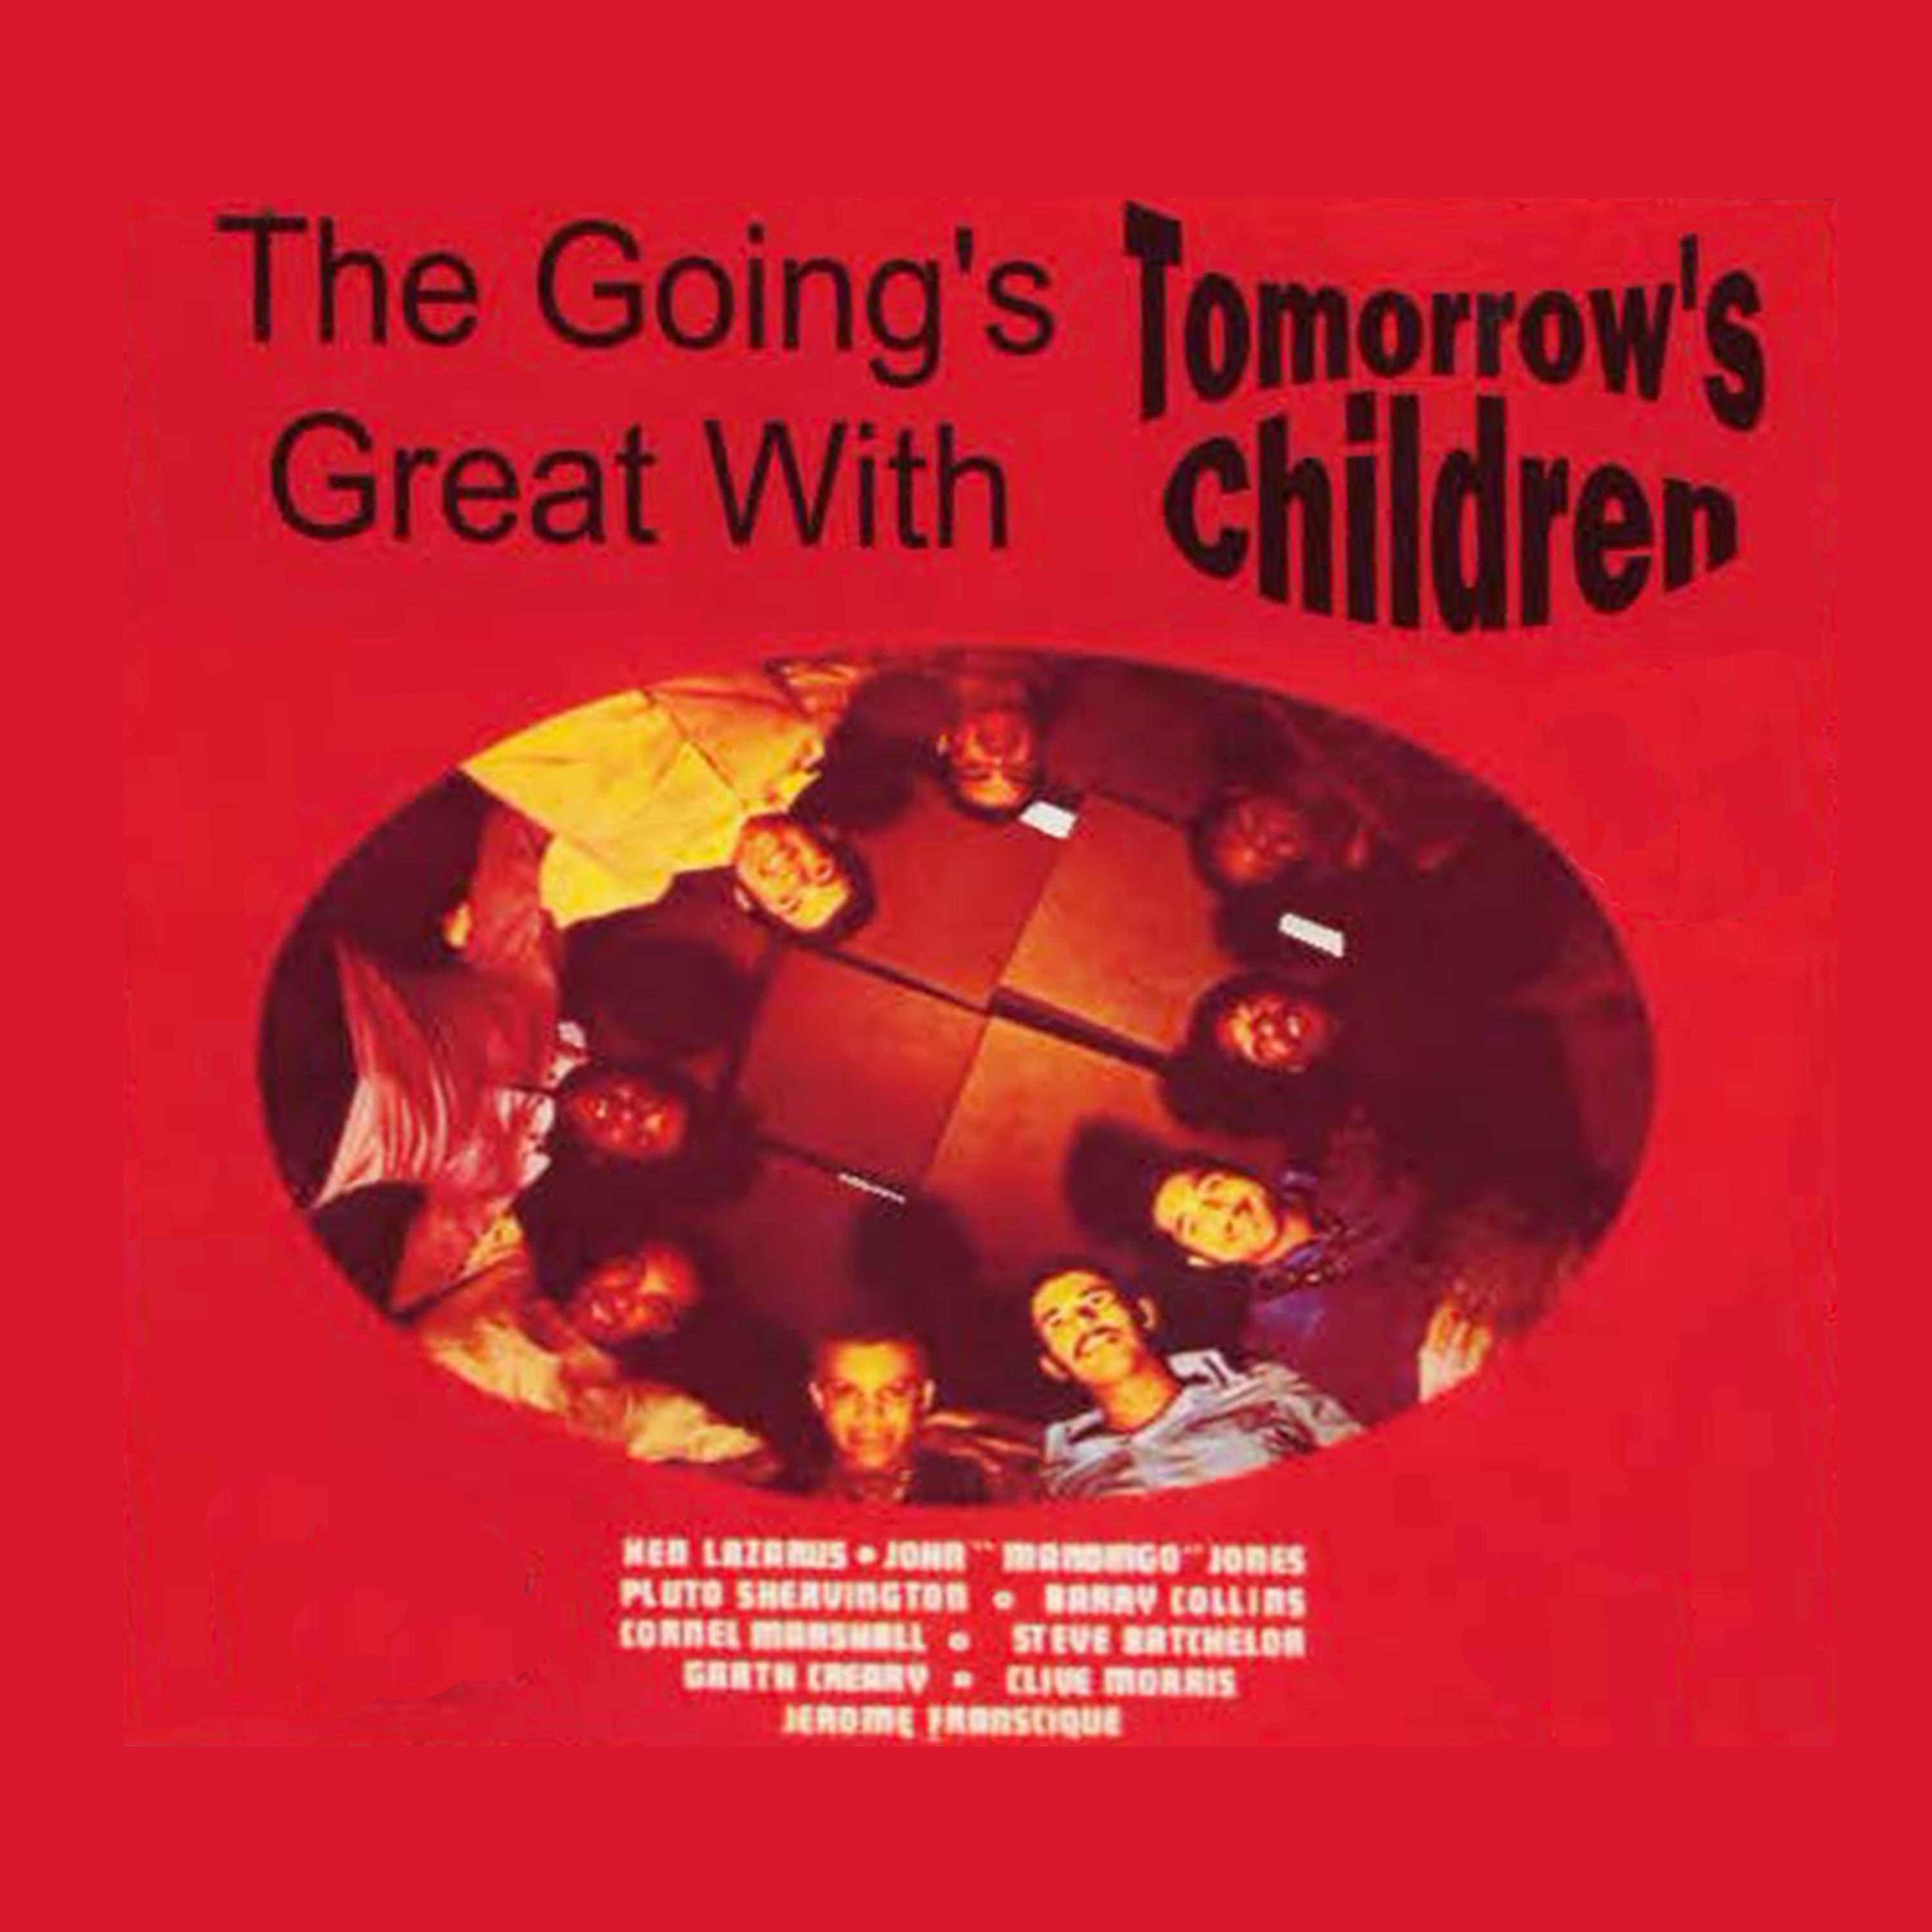 Постер альбома The Going's Great with Tomorrow's Children